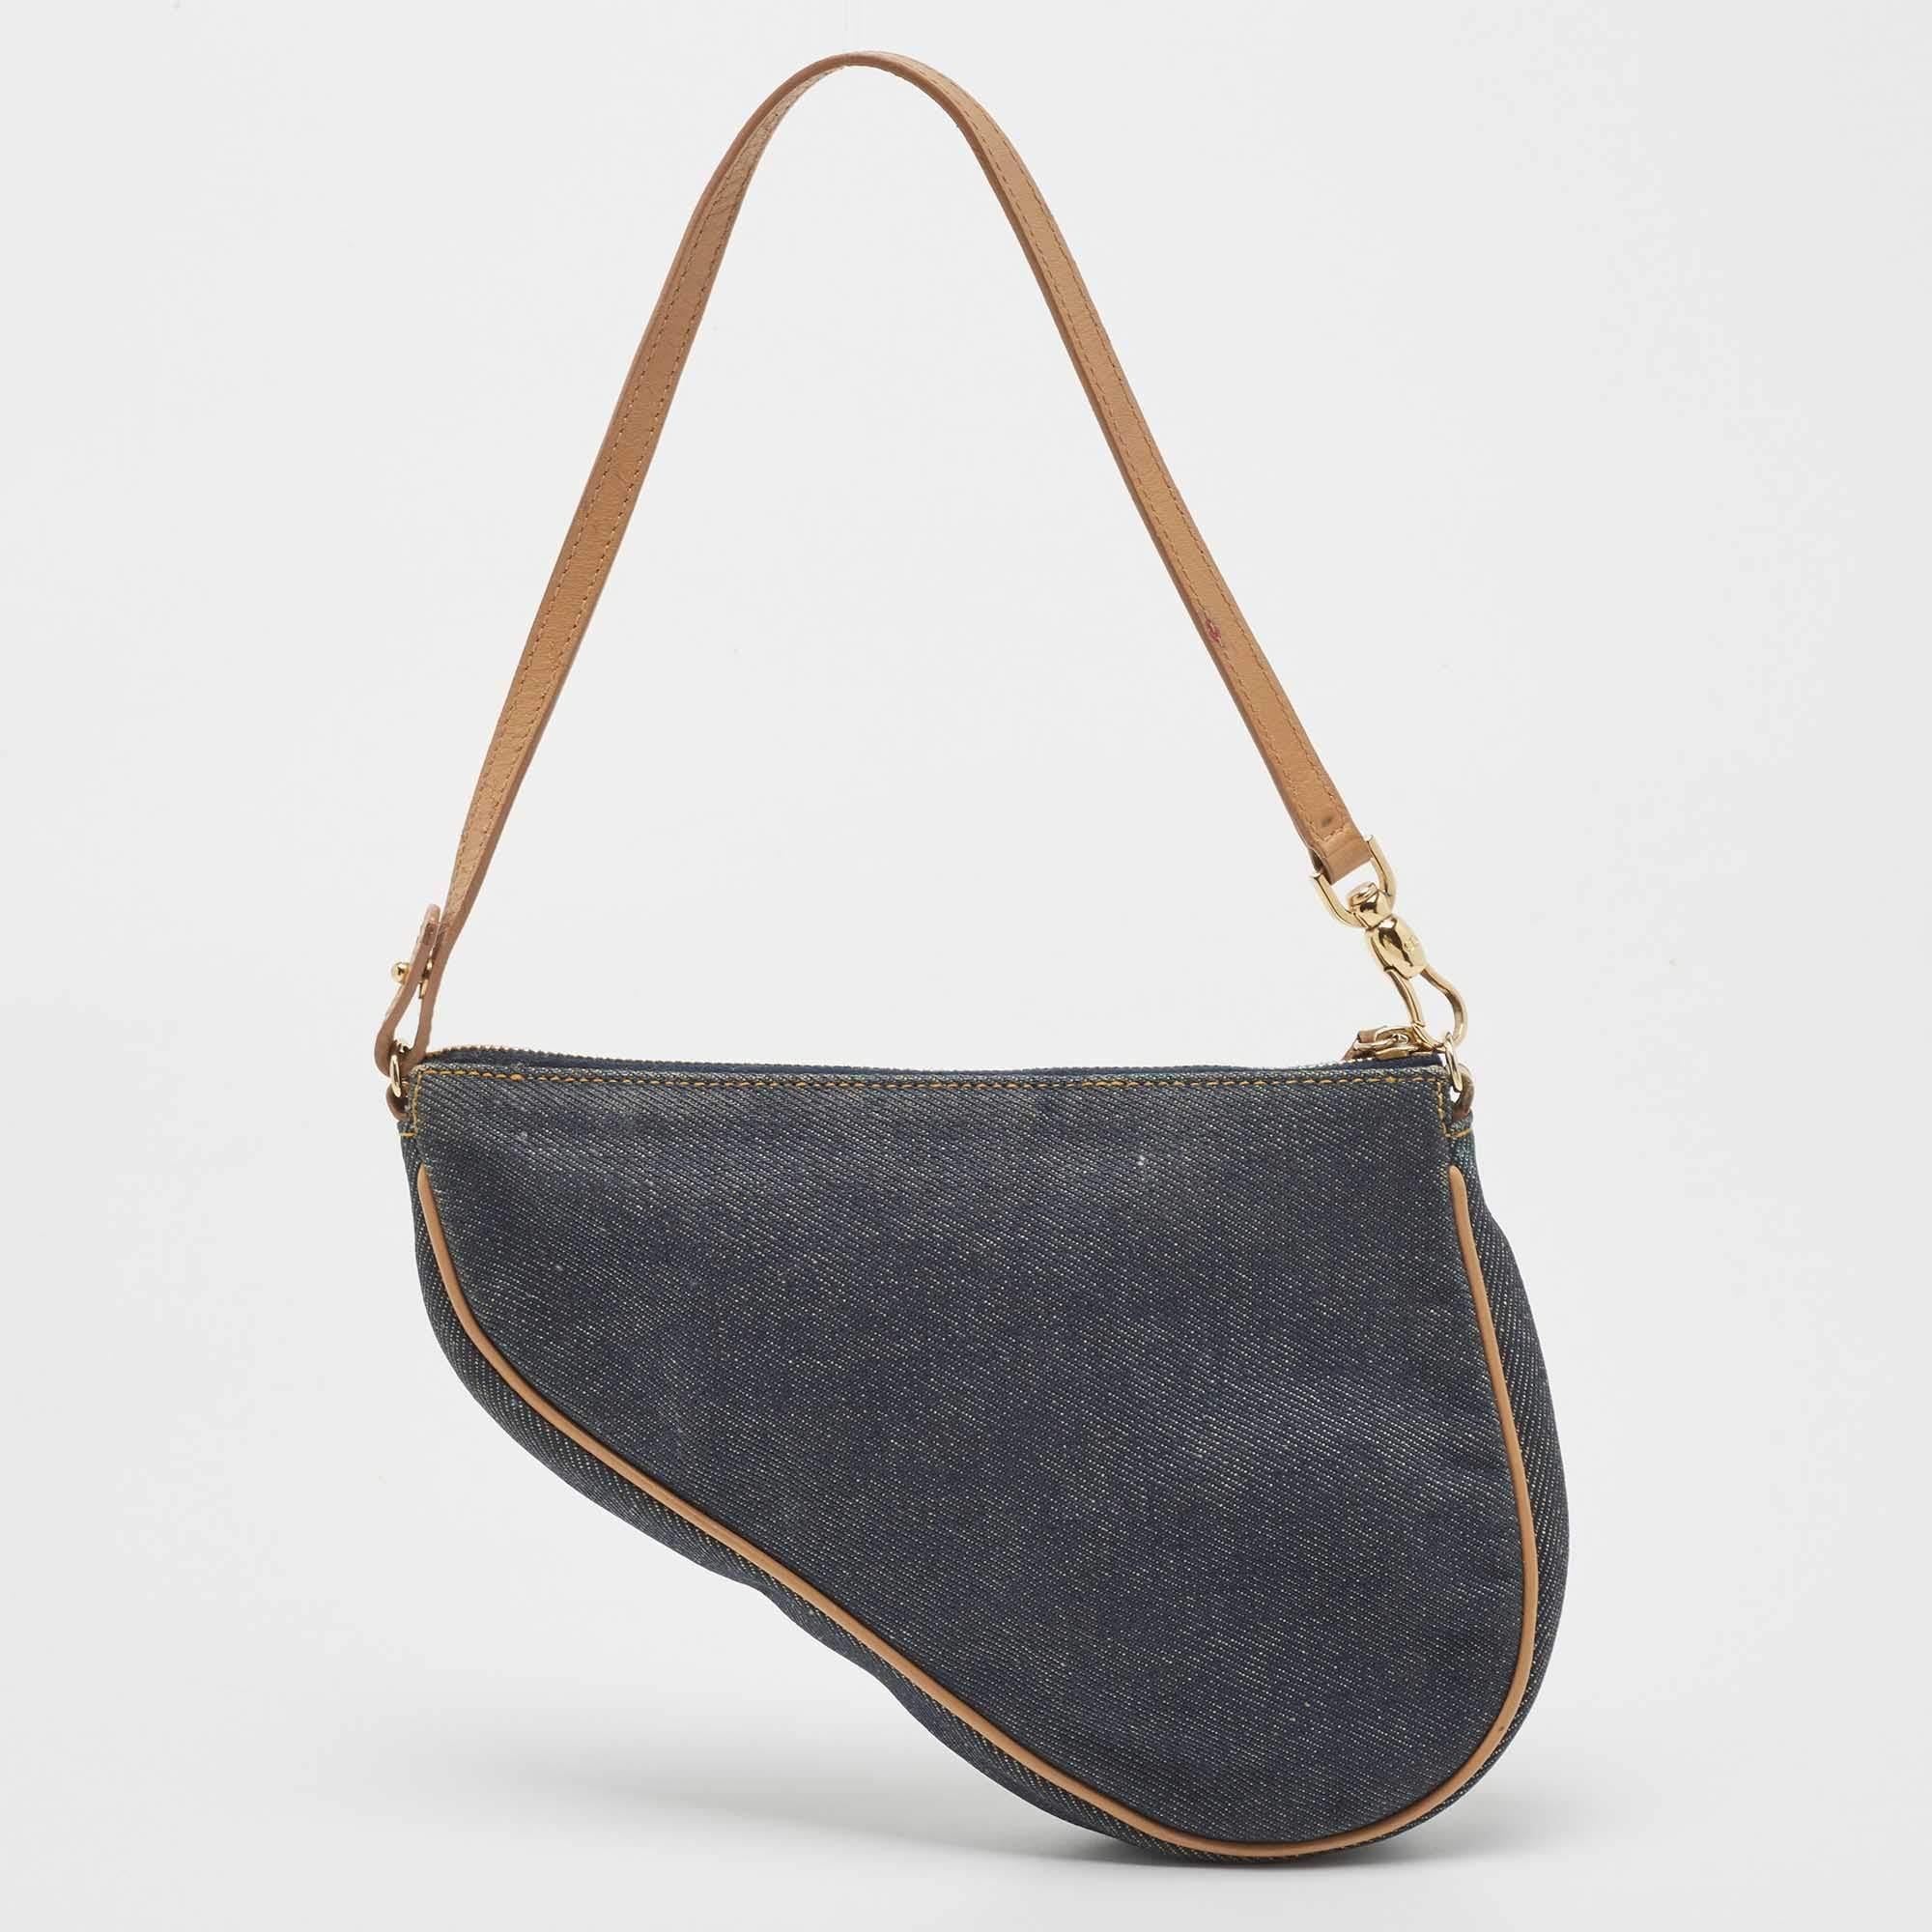 An example of timeless style and great design ideas, Dior's Saddle is sought after for all the right reasons. This bag for women is crafted using leather along with denim and is impressive with its fashionable design. Lined with nylon, it will keep